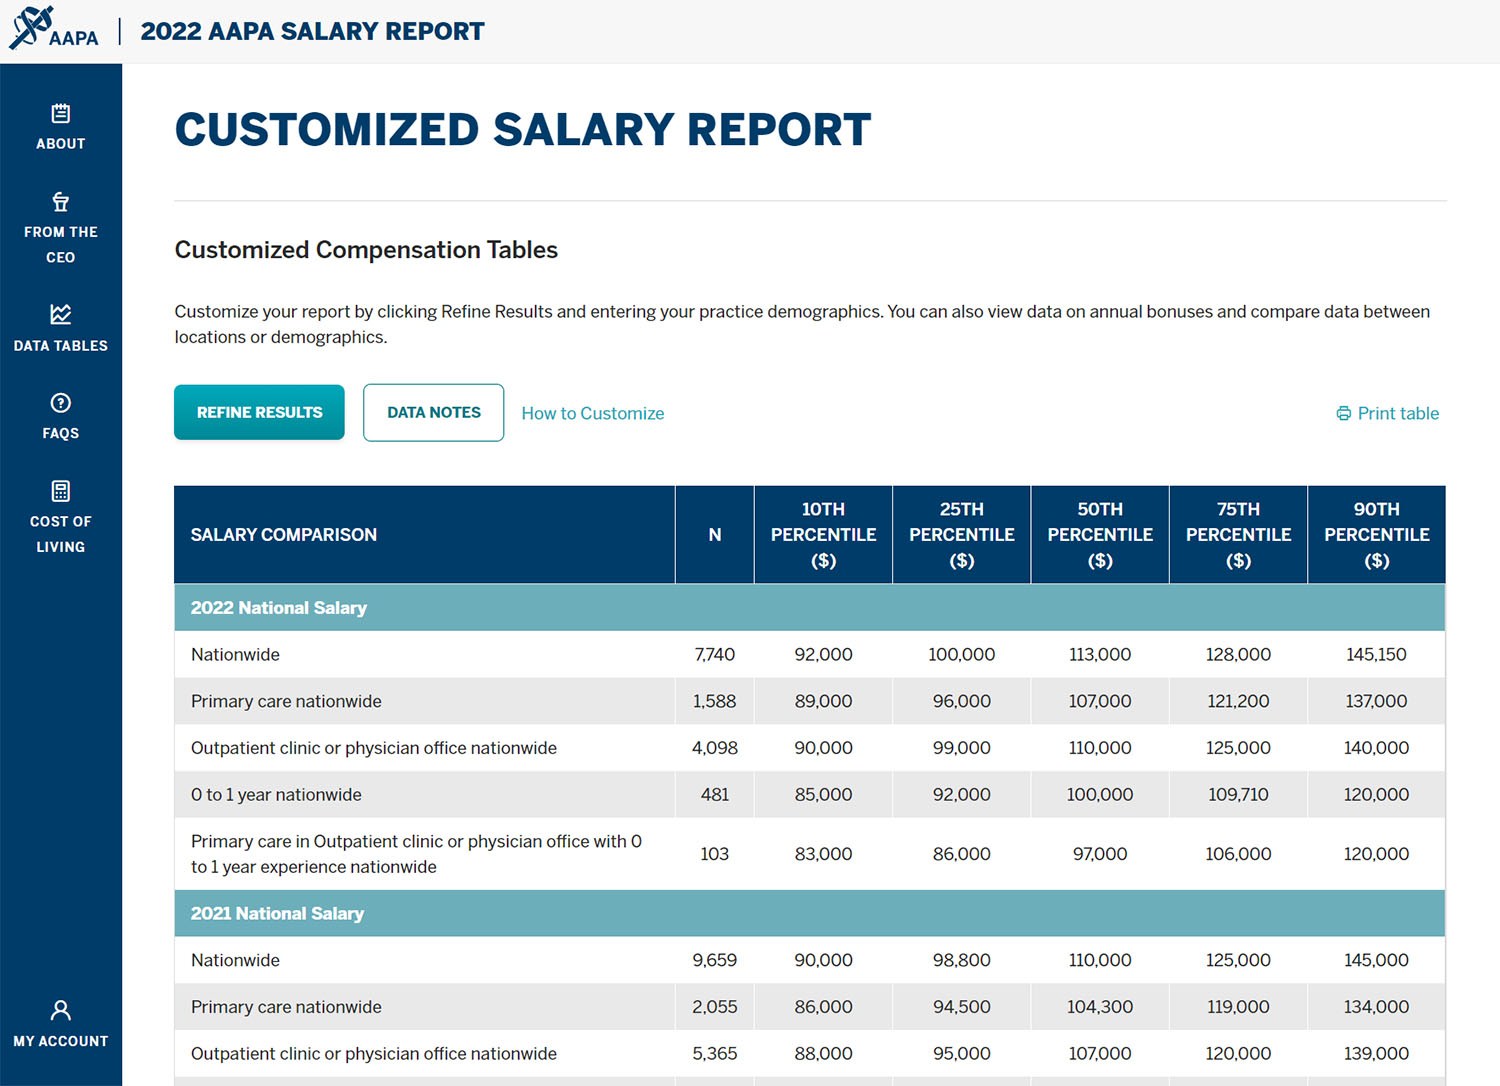 Negotiate Your Salary With the 2022 AAPA Salary Report AAPA